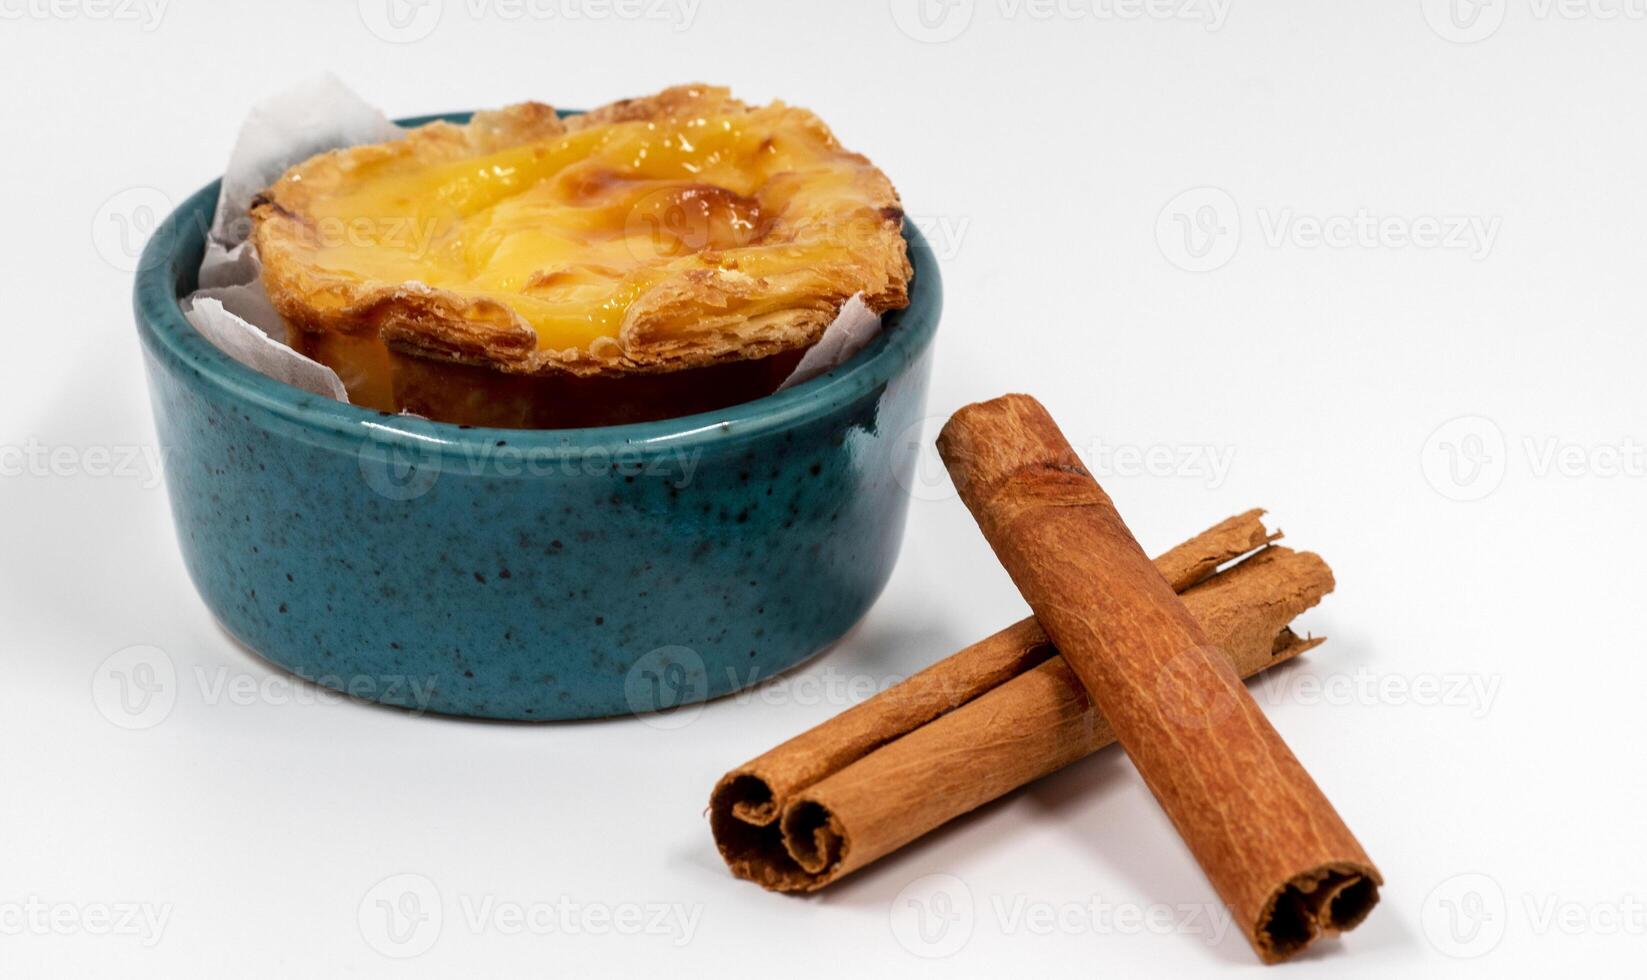 Pastel de nata tarts or Portuguese egg tart and cinnamon sticks isolated on white background. Pastel de Belem is a small pie with a crispy puff pastry crust and a custard cream filling. photo